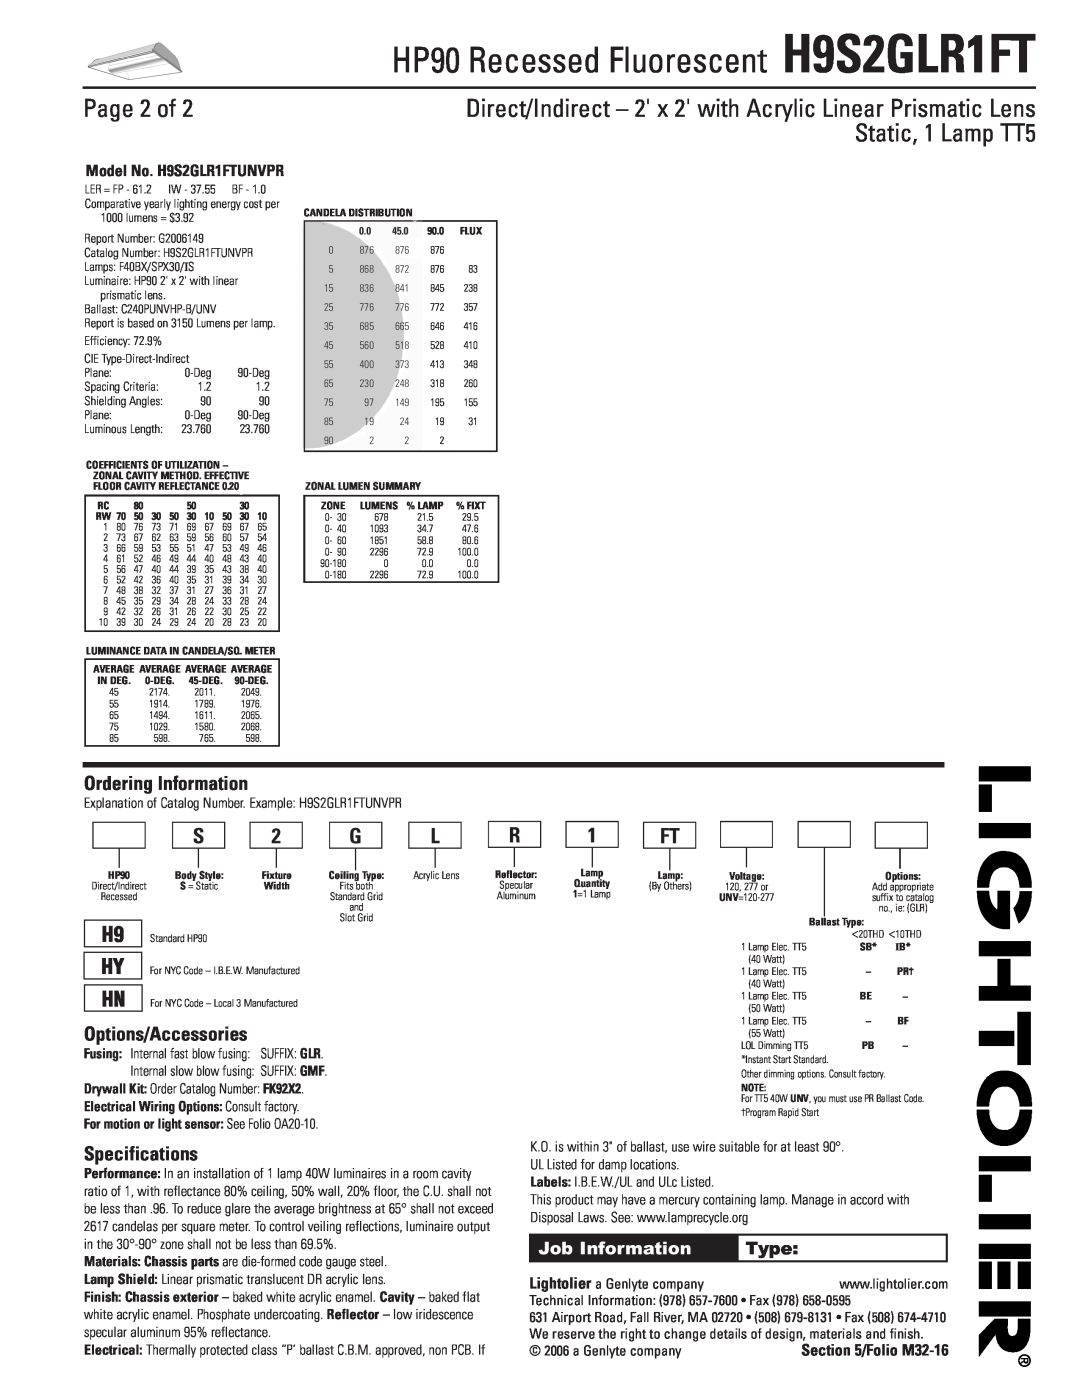 Lightolier dimensions Page 2 of, HP90 Recessed Fluorescent H9S2GLR1FT, Static, 1 Lamp TT5 